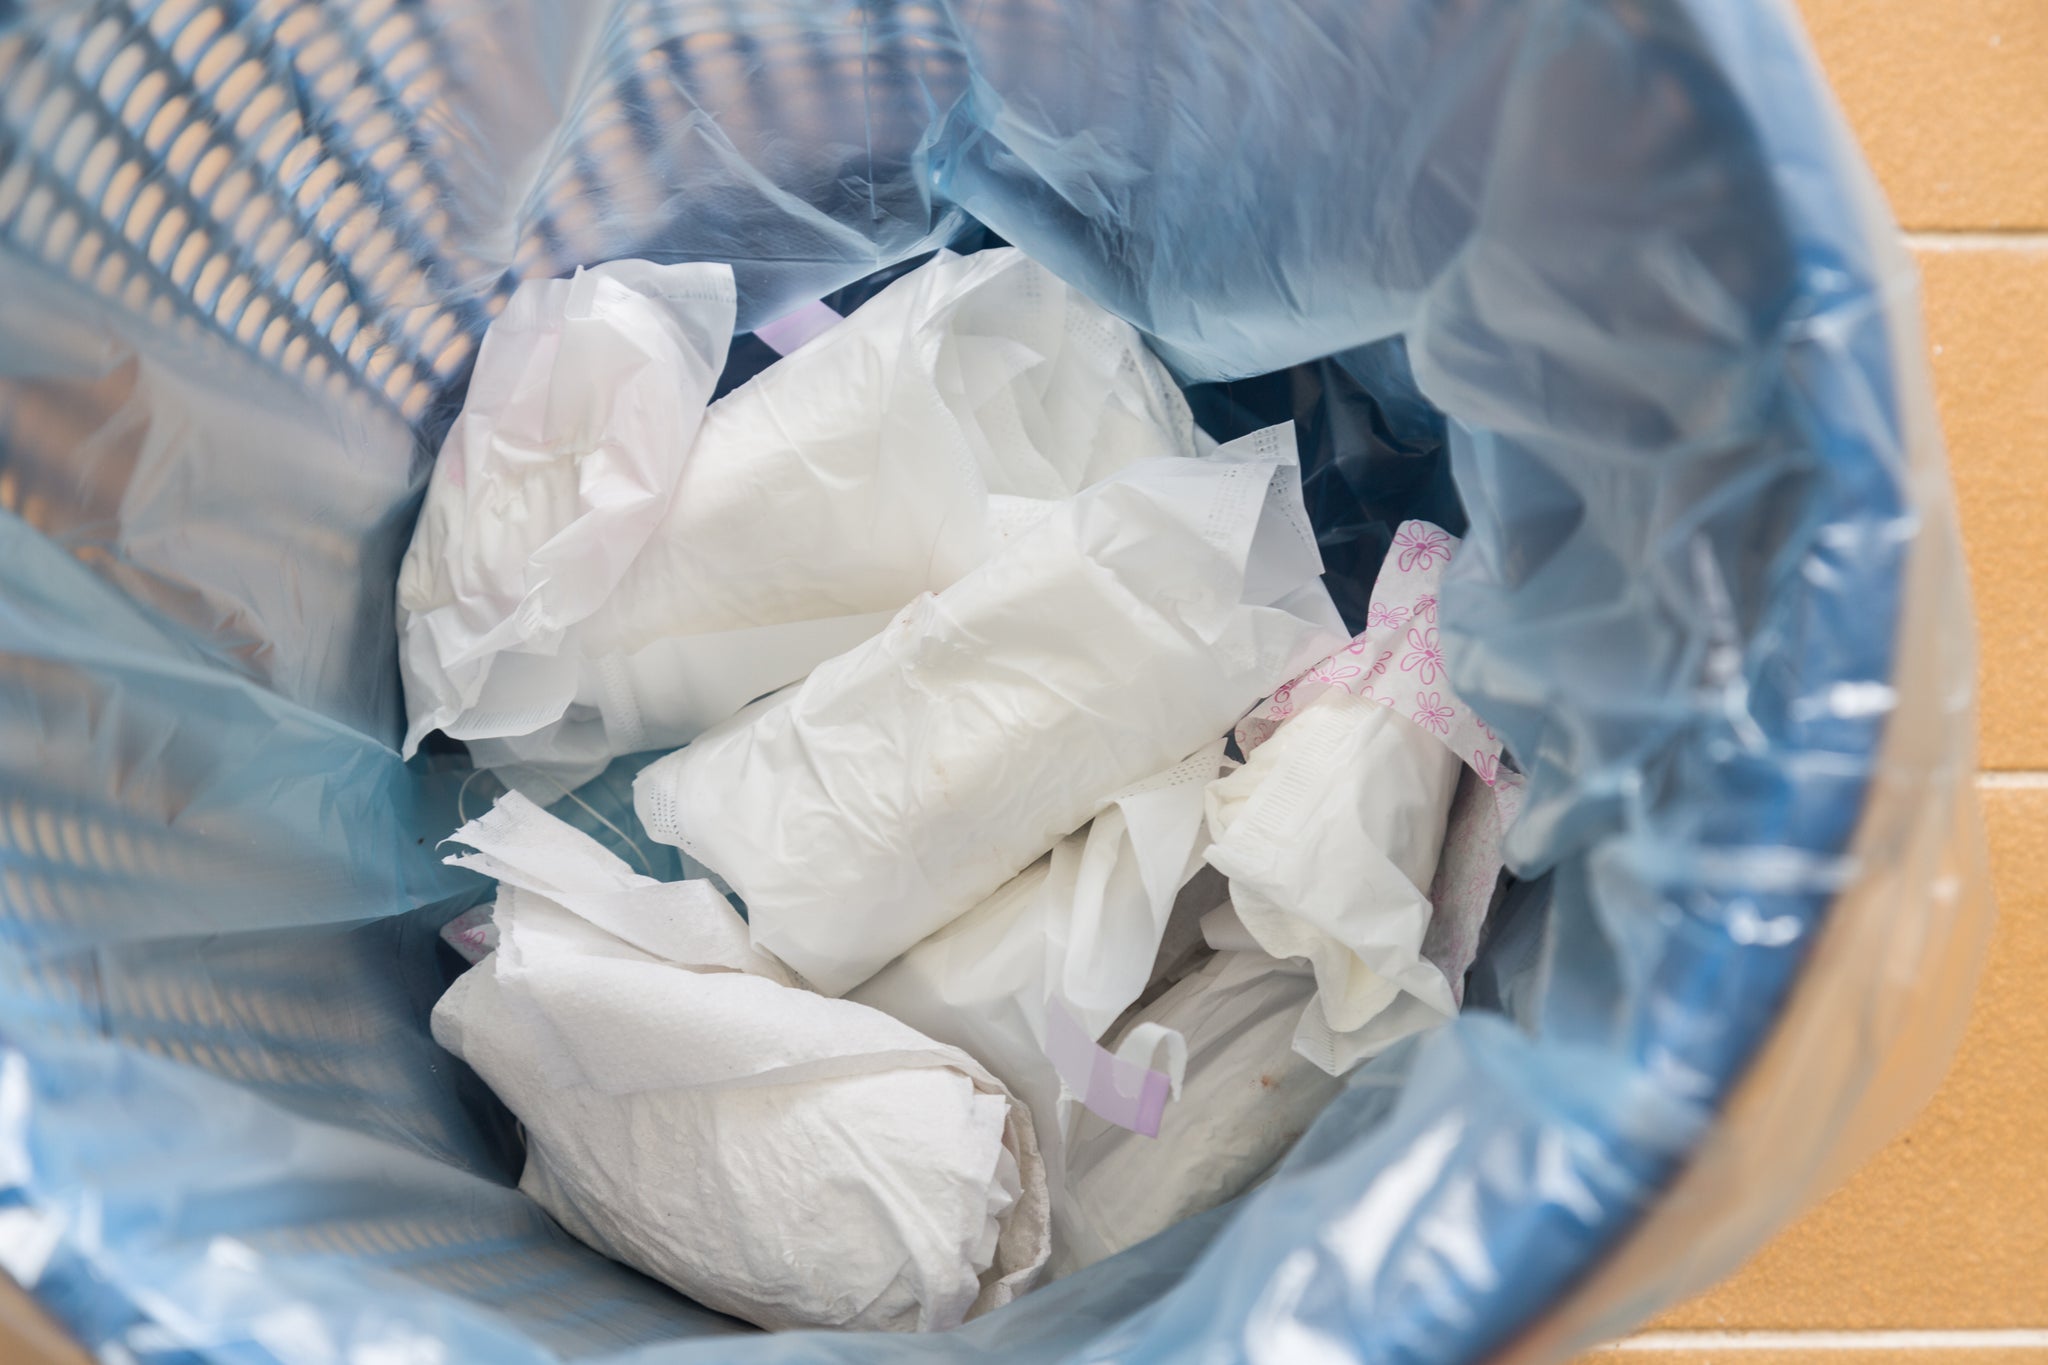 A close up of diapers in a trash can.